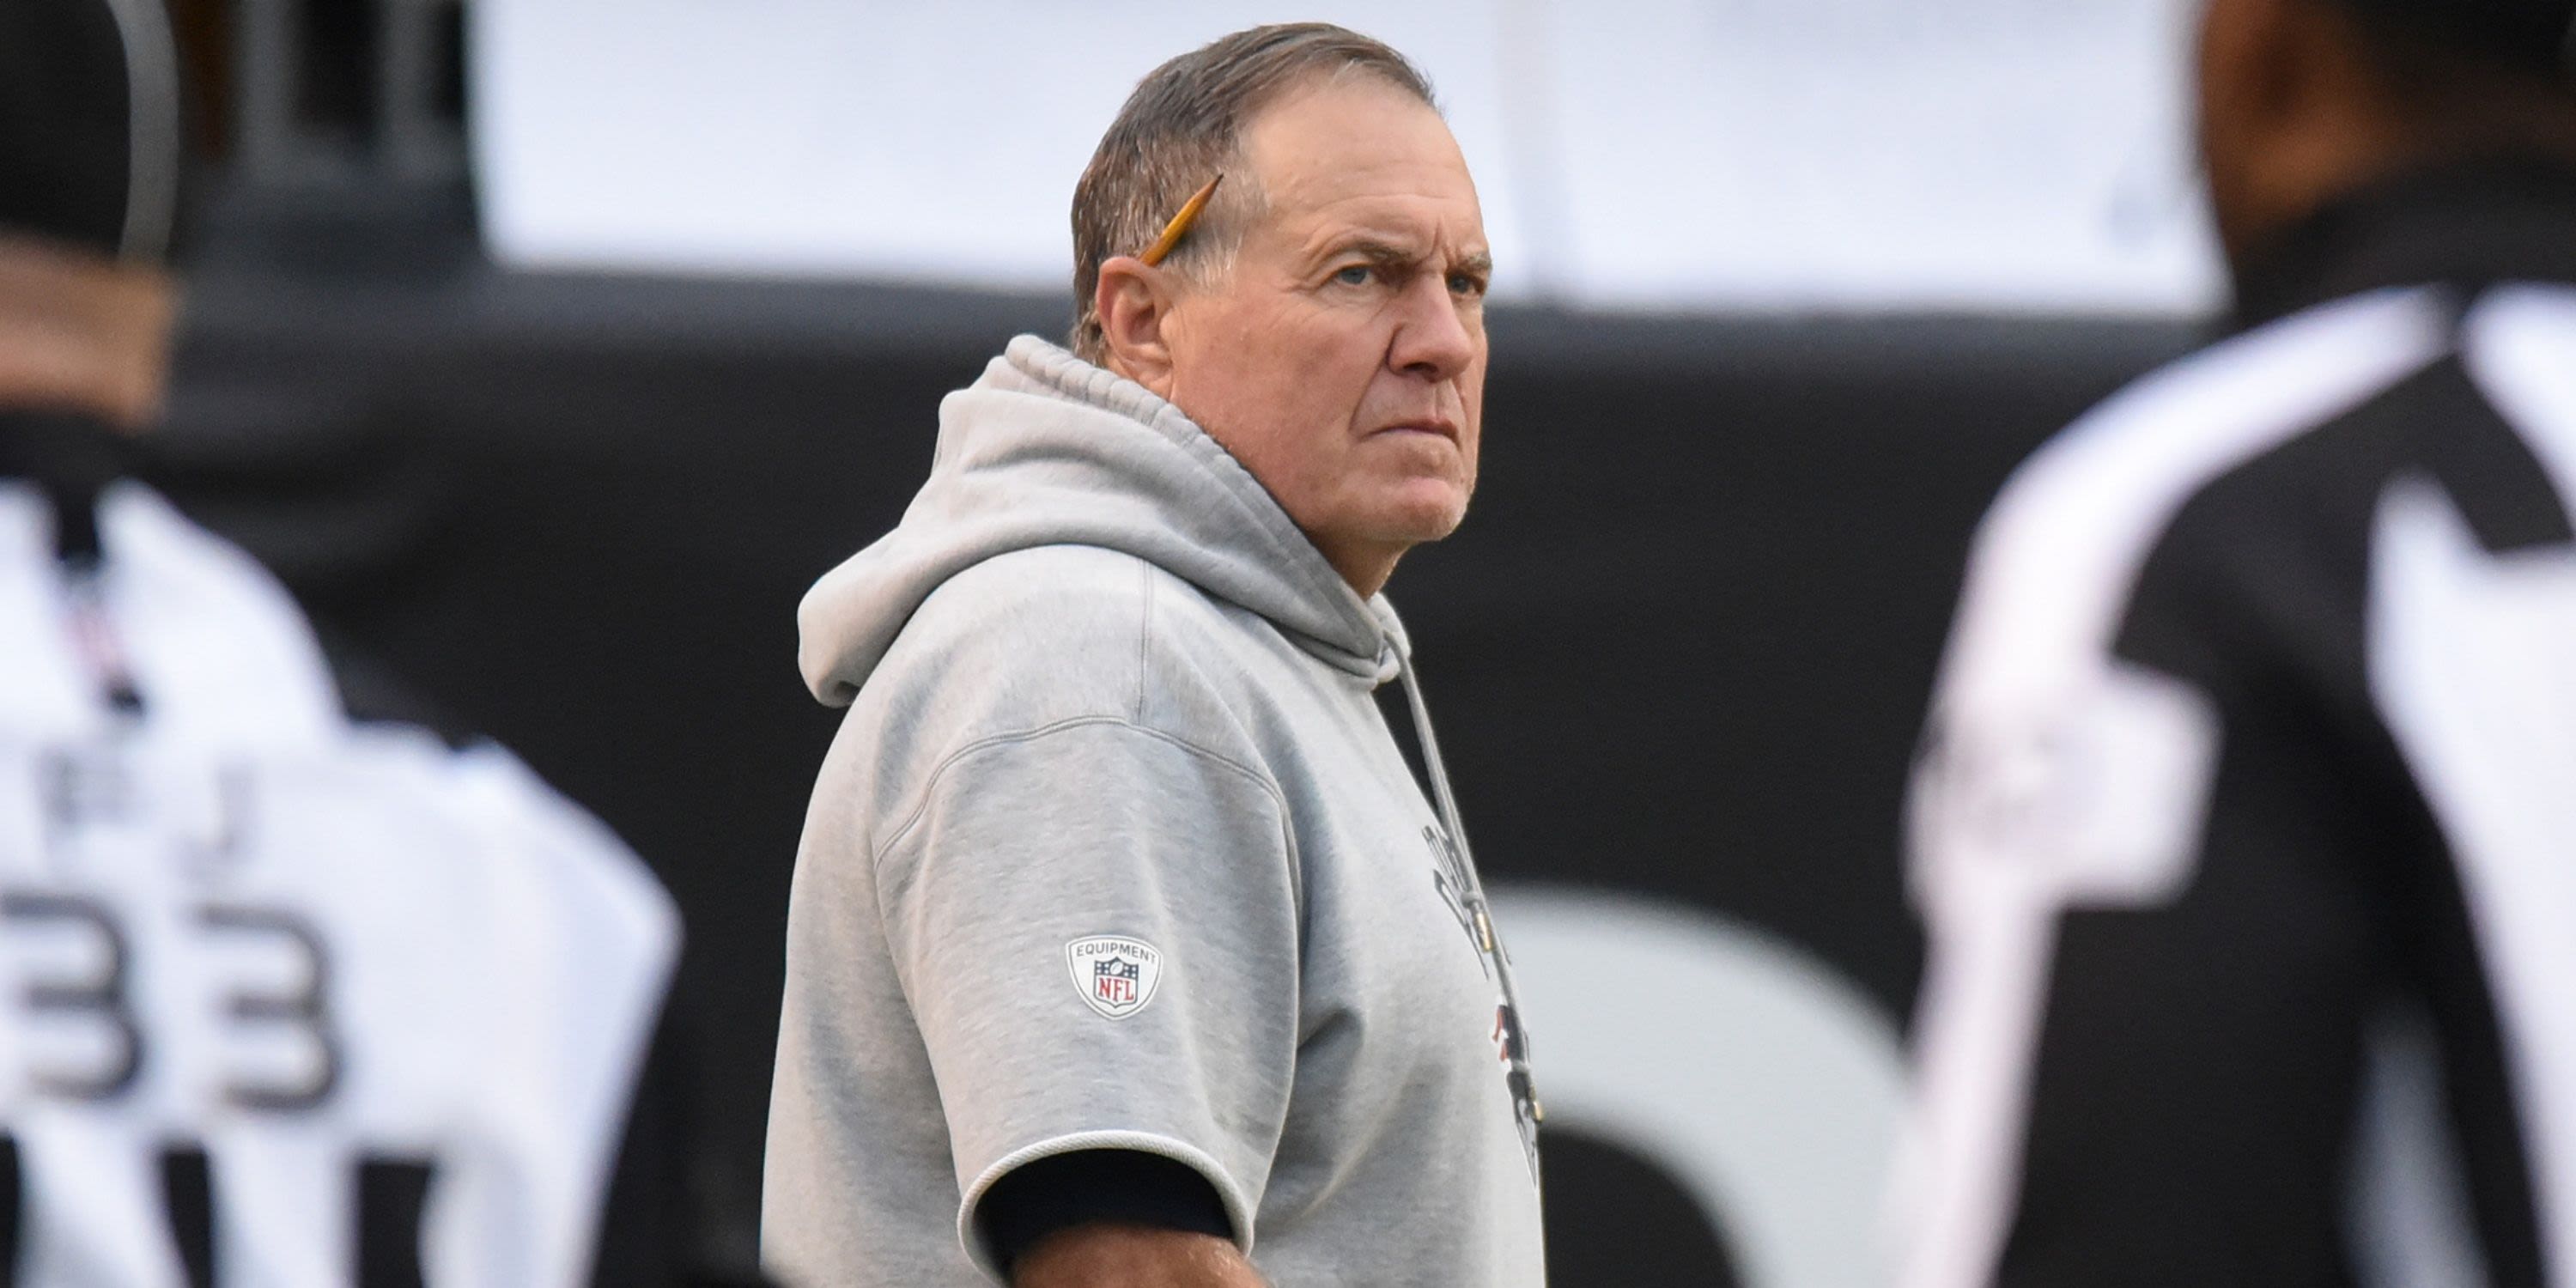 Patriots DE Reveals the One Thing He Misses About Bill Belichick